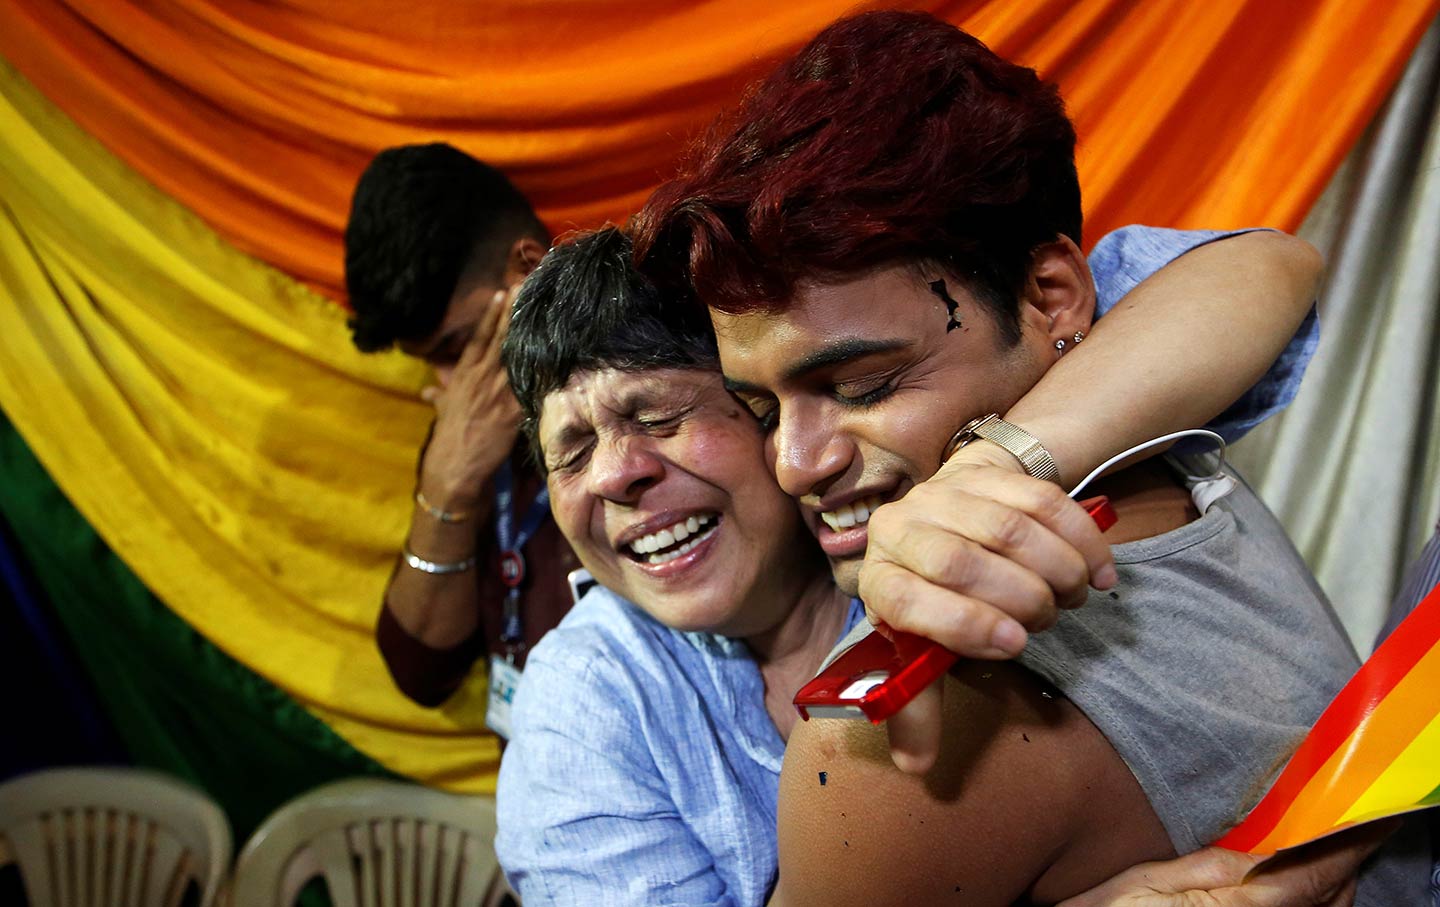 India lifts ban on gay sex